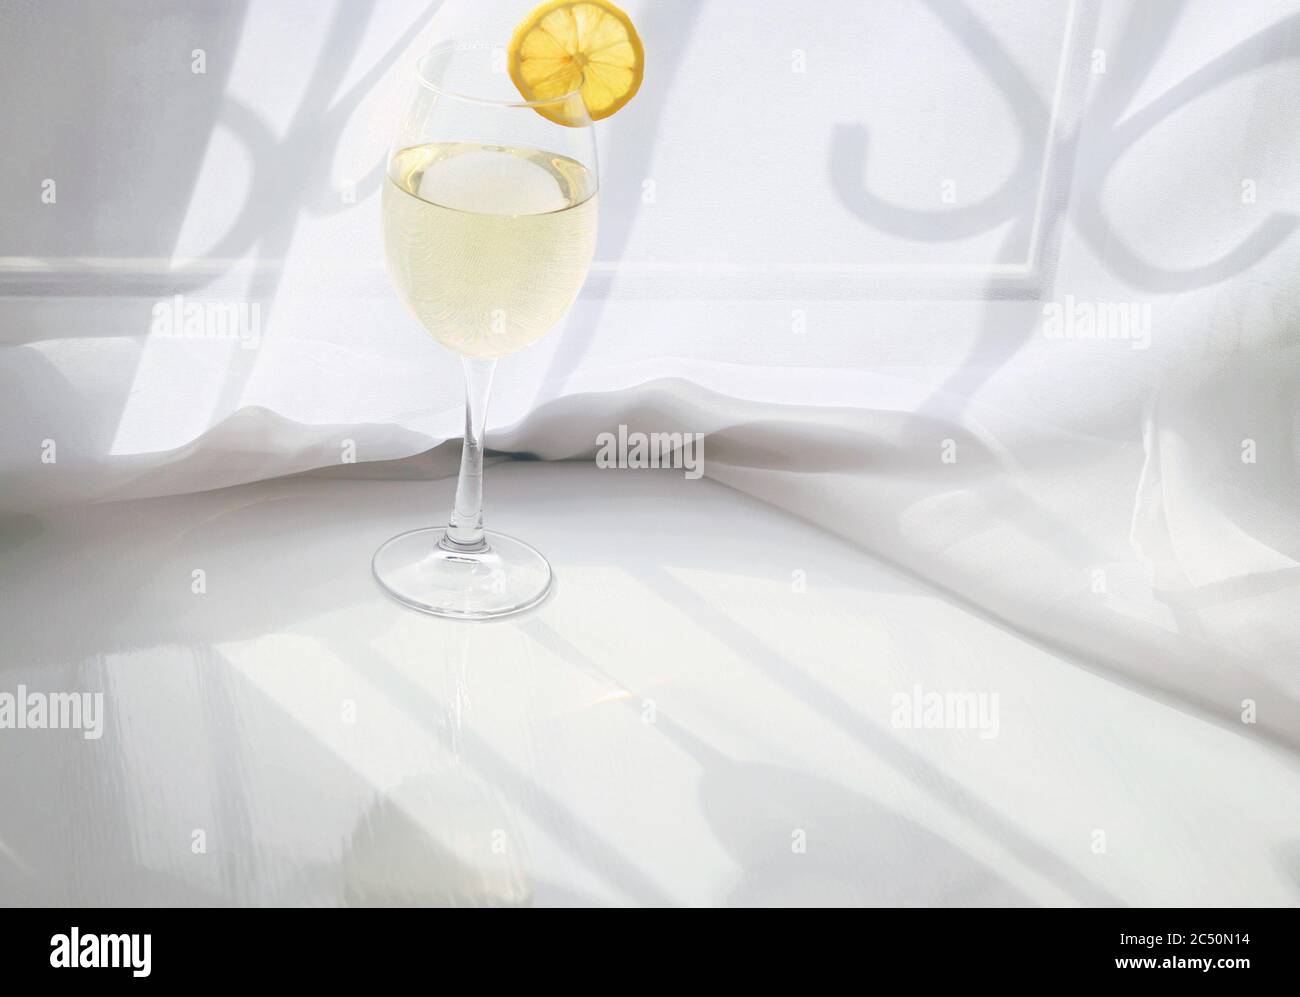 Limoncello or white wine in transparent long glass Stock Photo